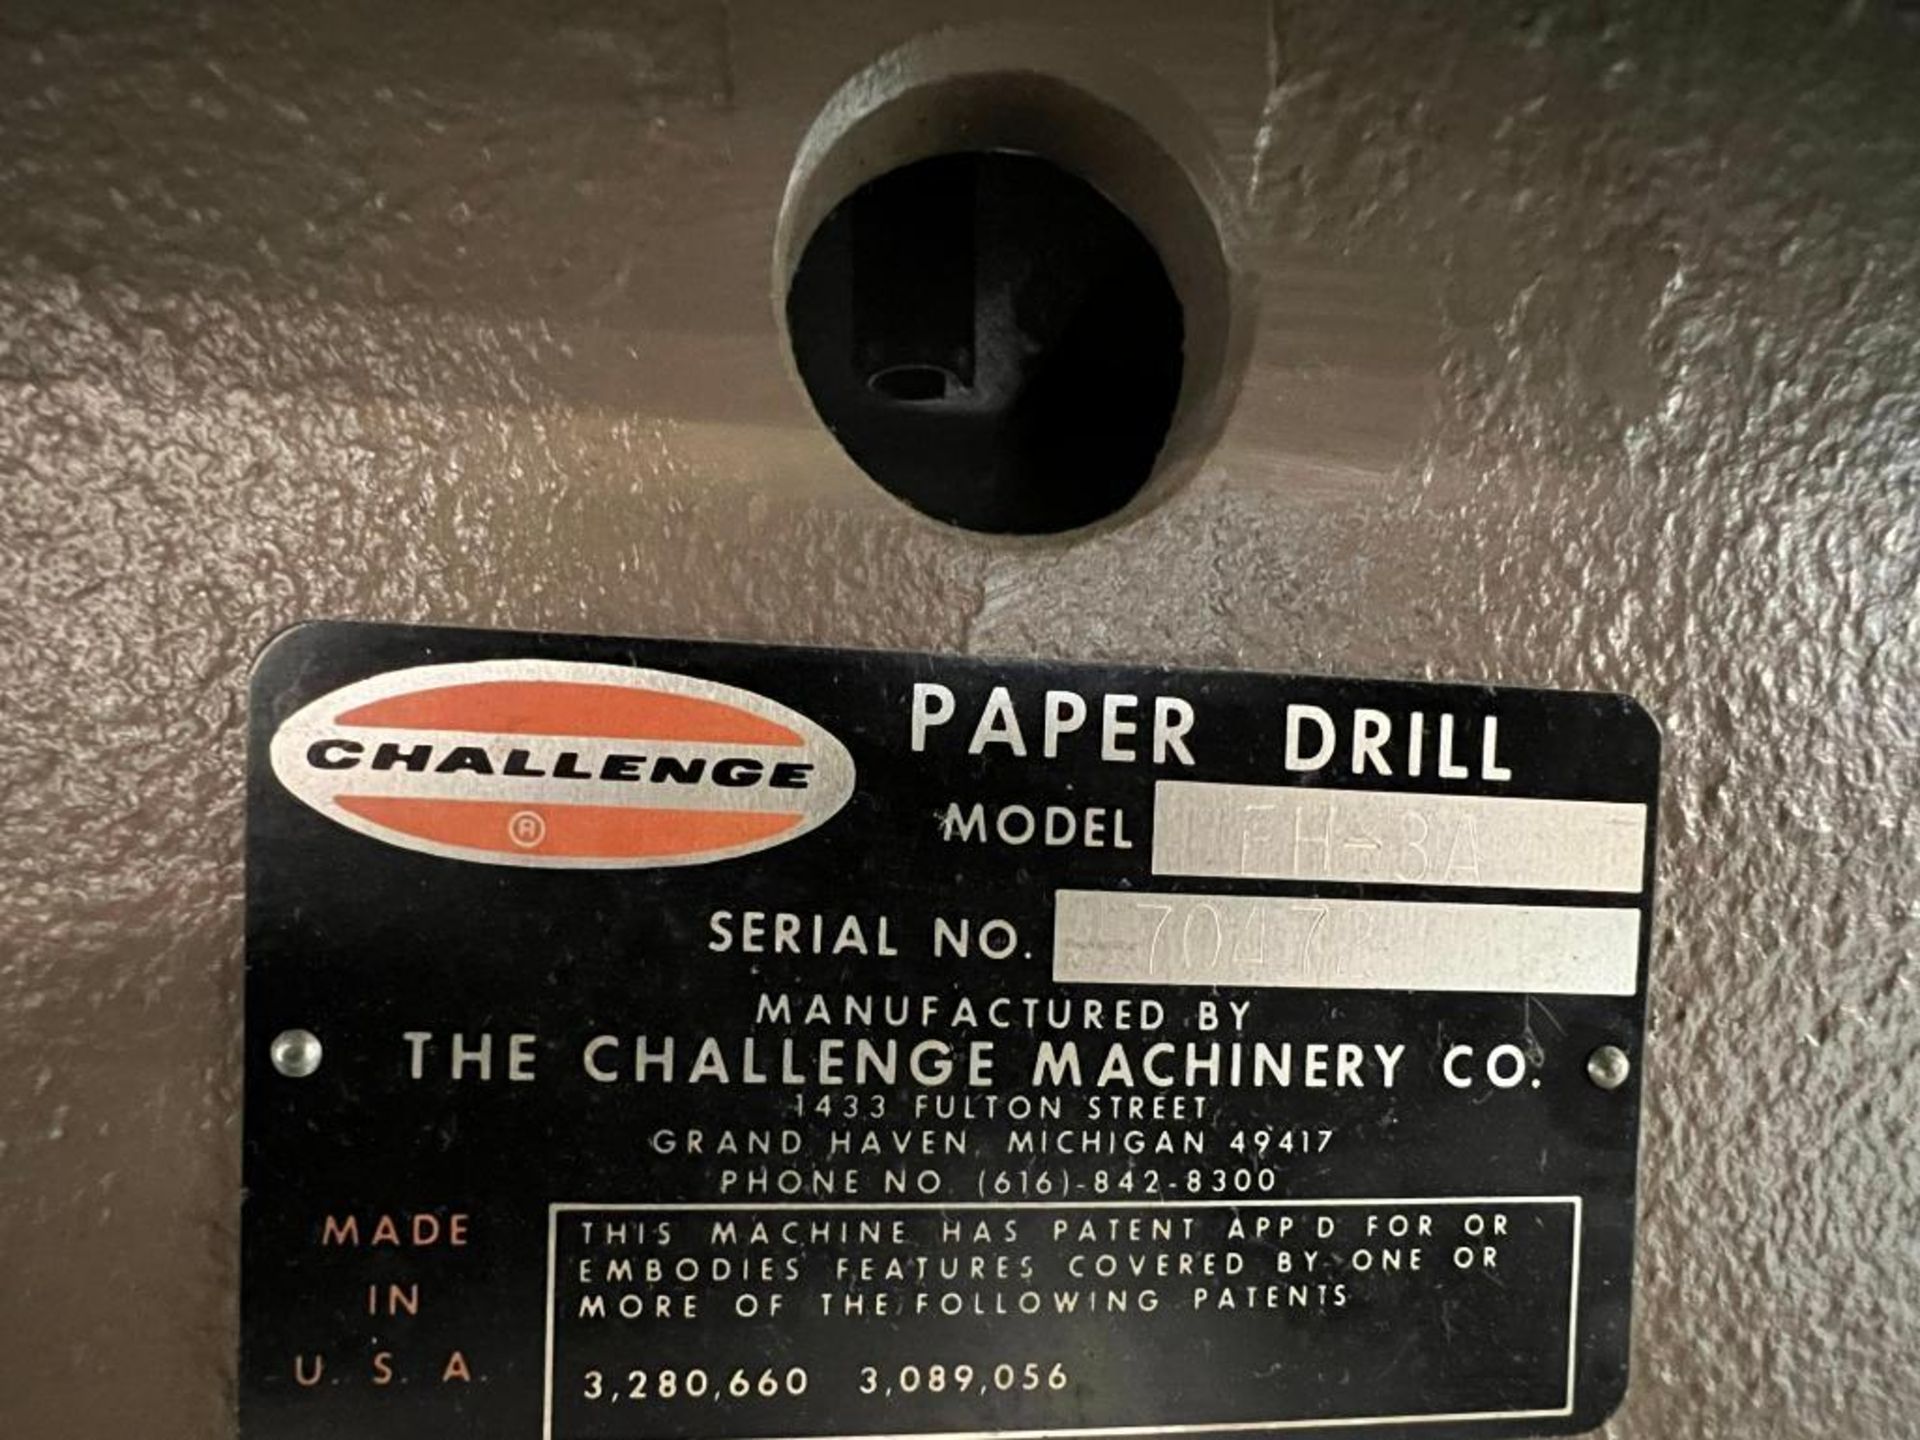 Challenge Model Eh-3a Paper Drilling Machine - Image 7 of 7